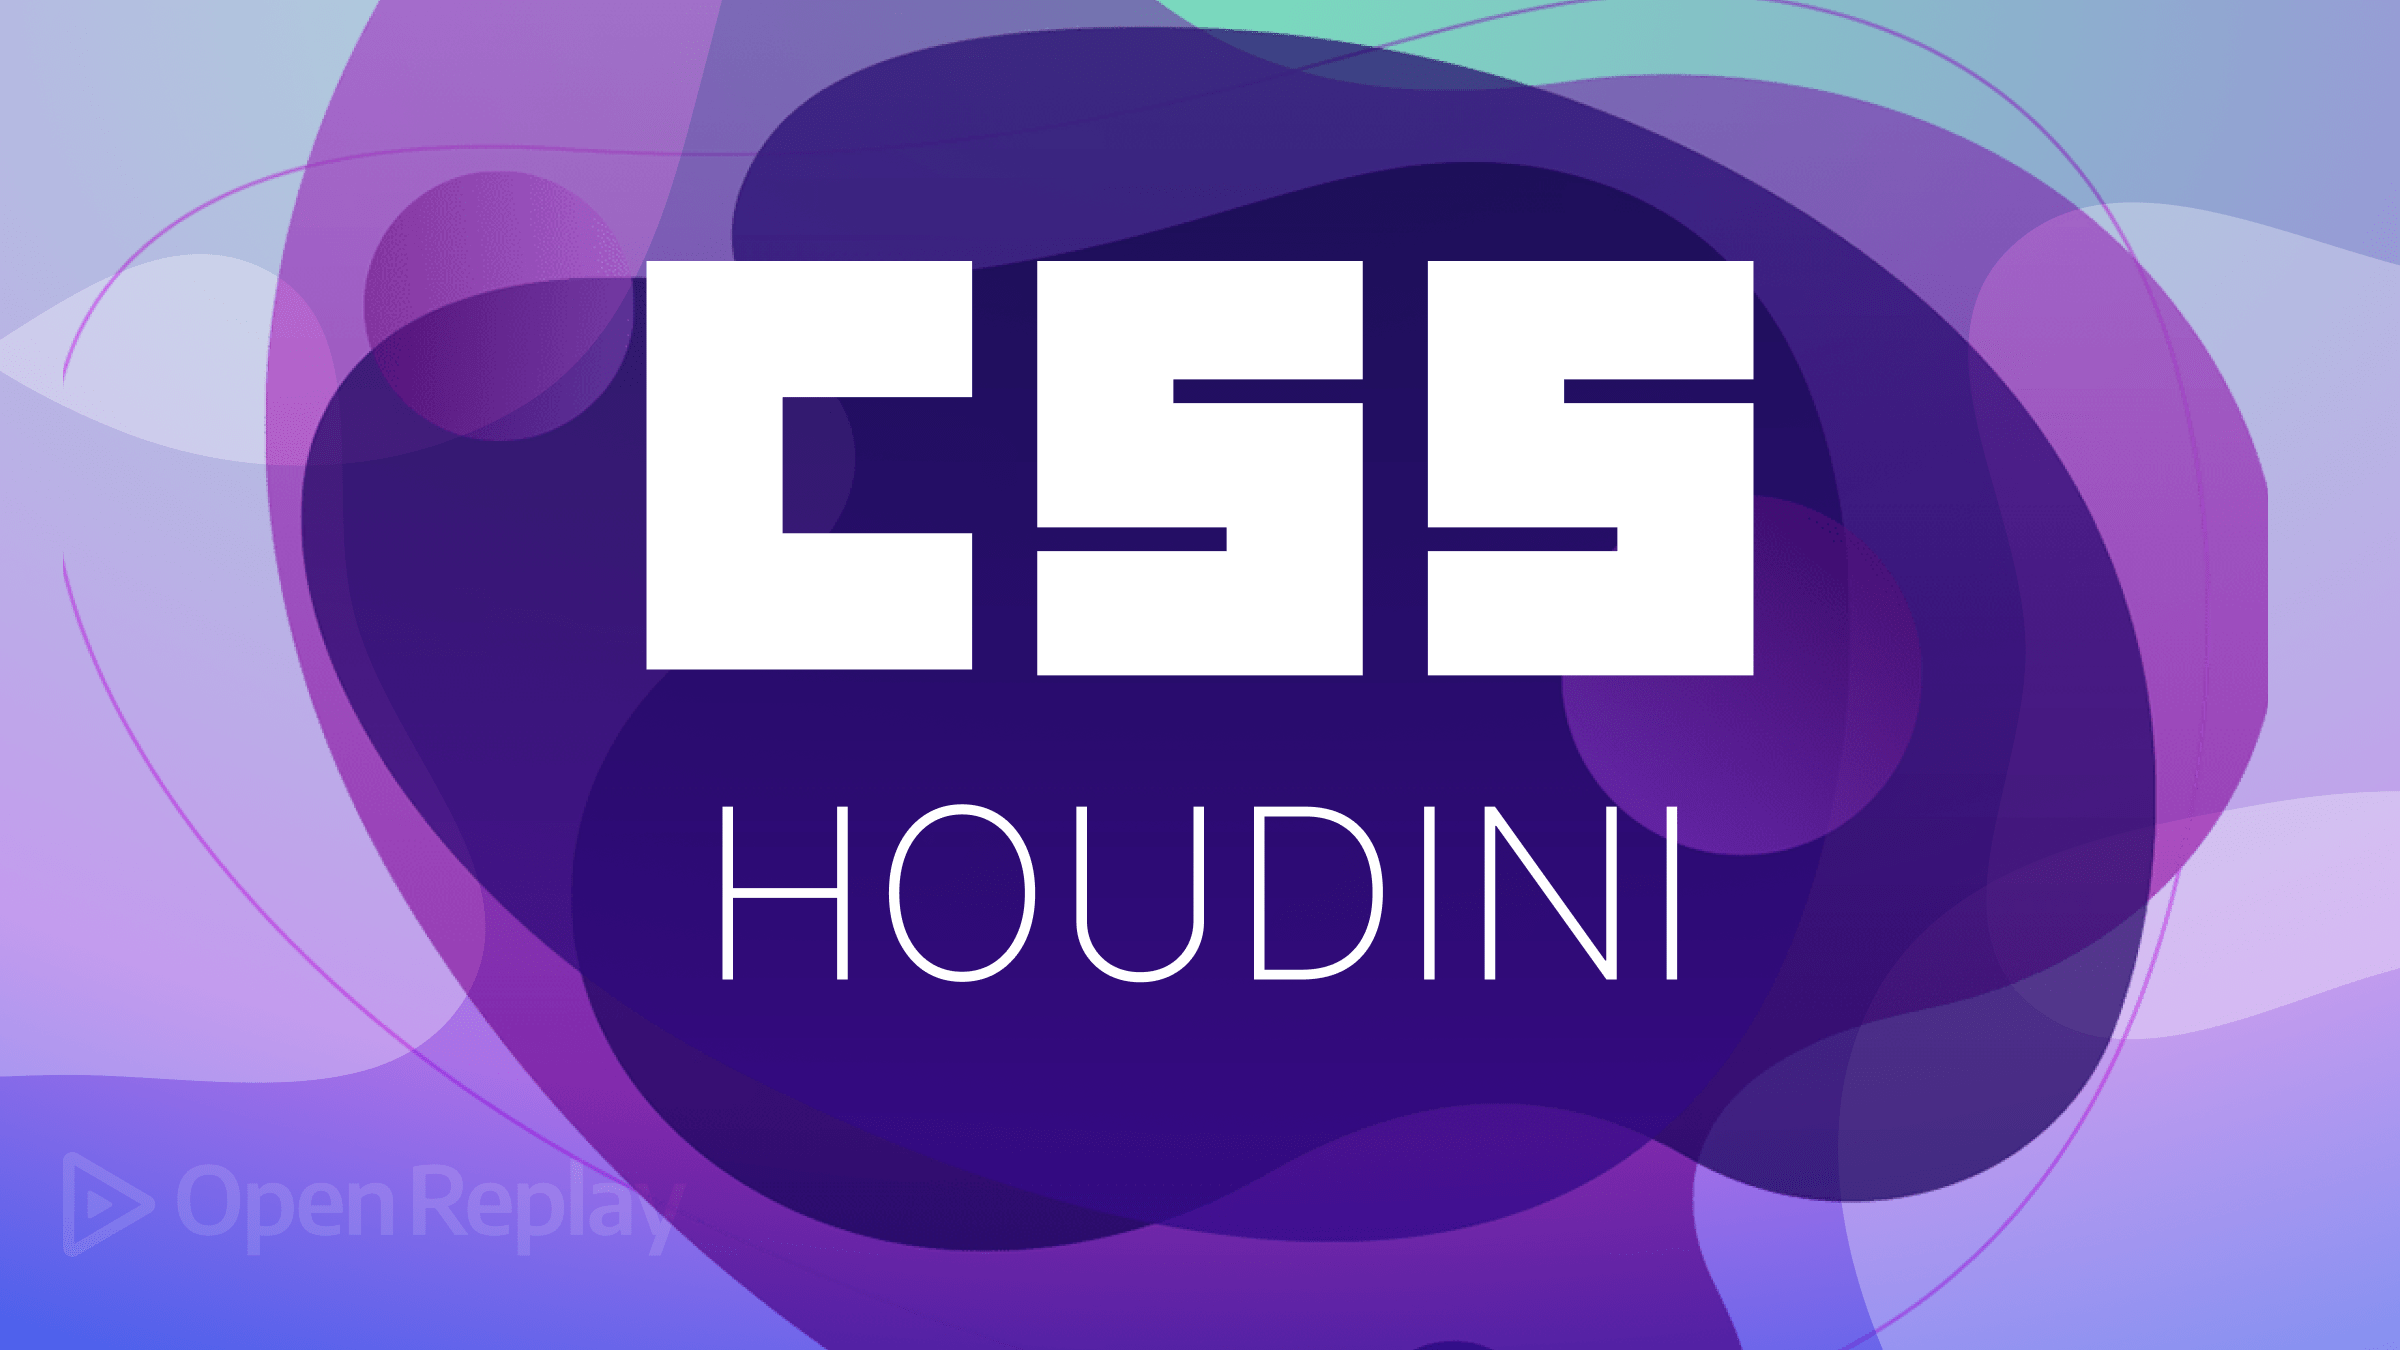 CSS Houdini: The future of styling